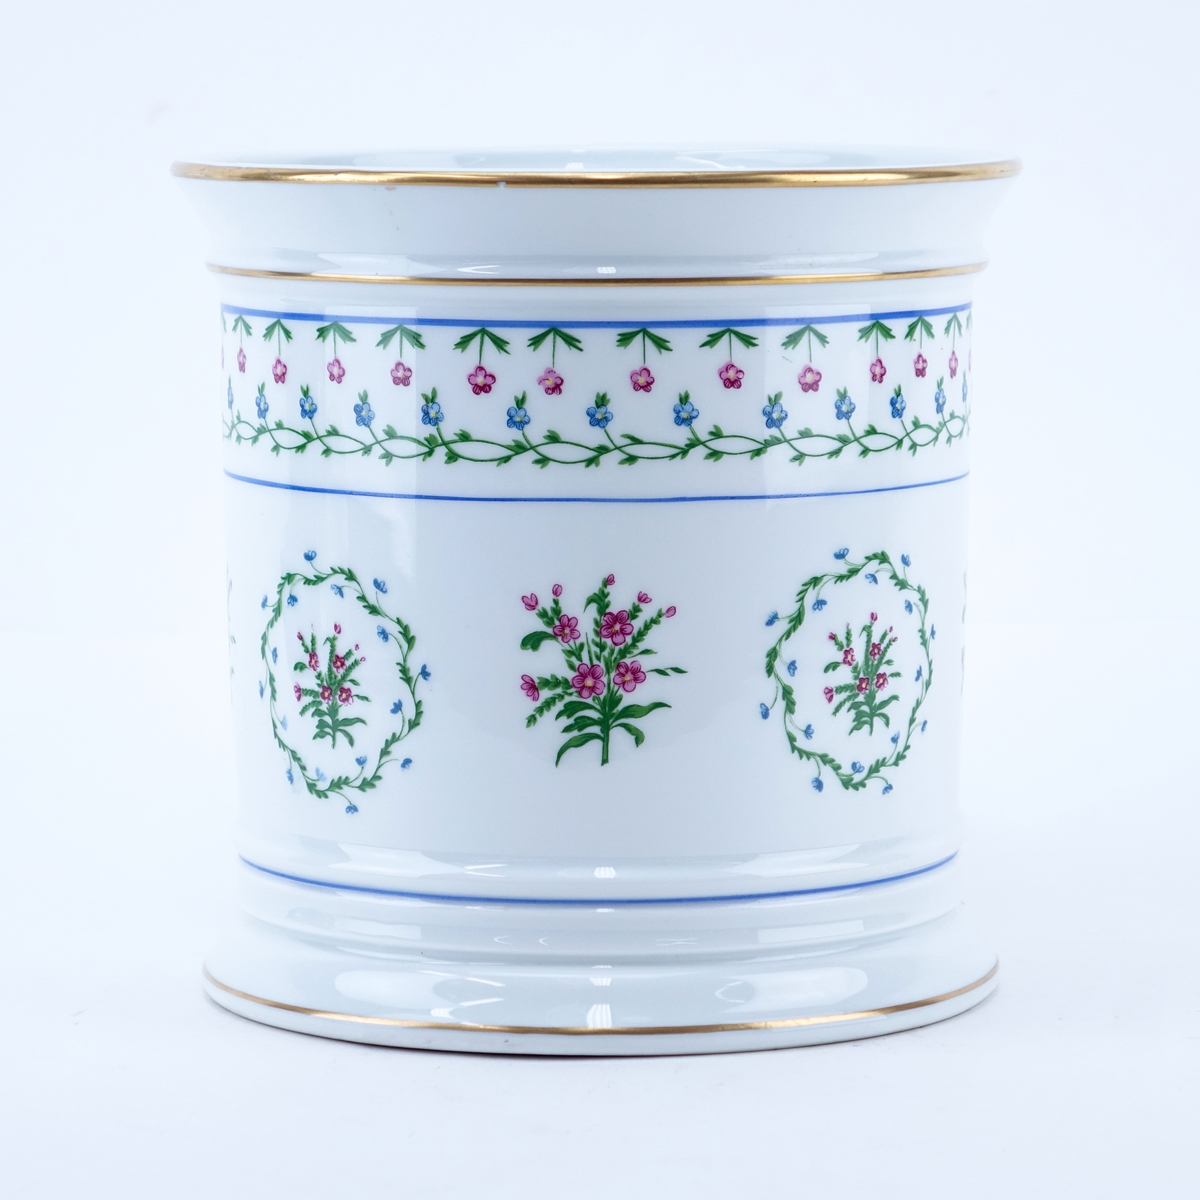 A. Raynaud Limoges Handpainted Cachepot.